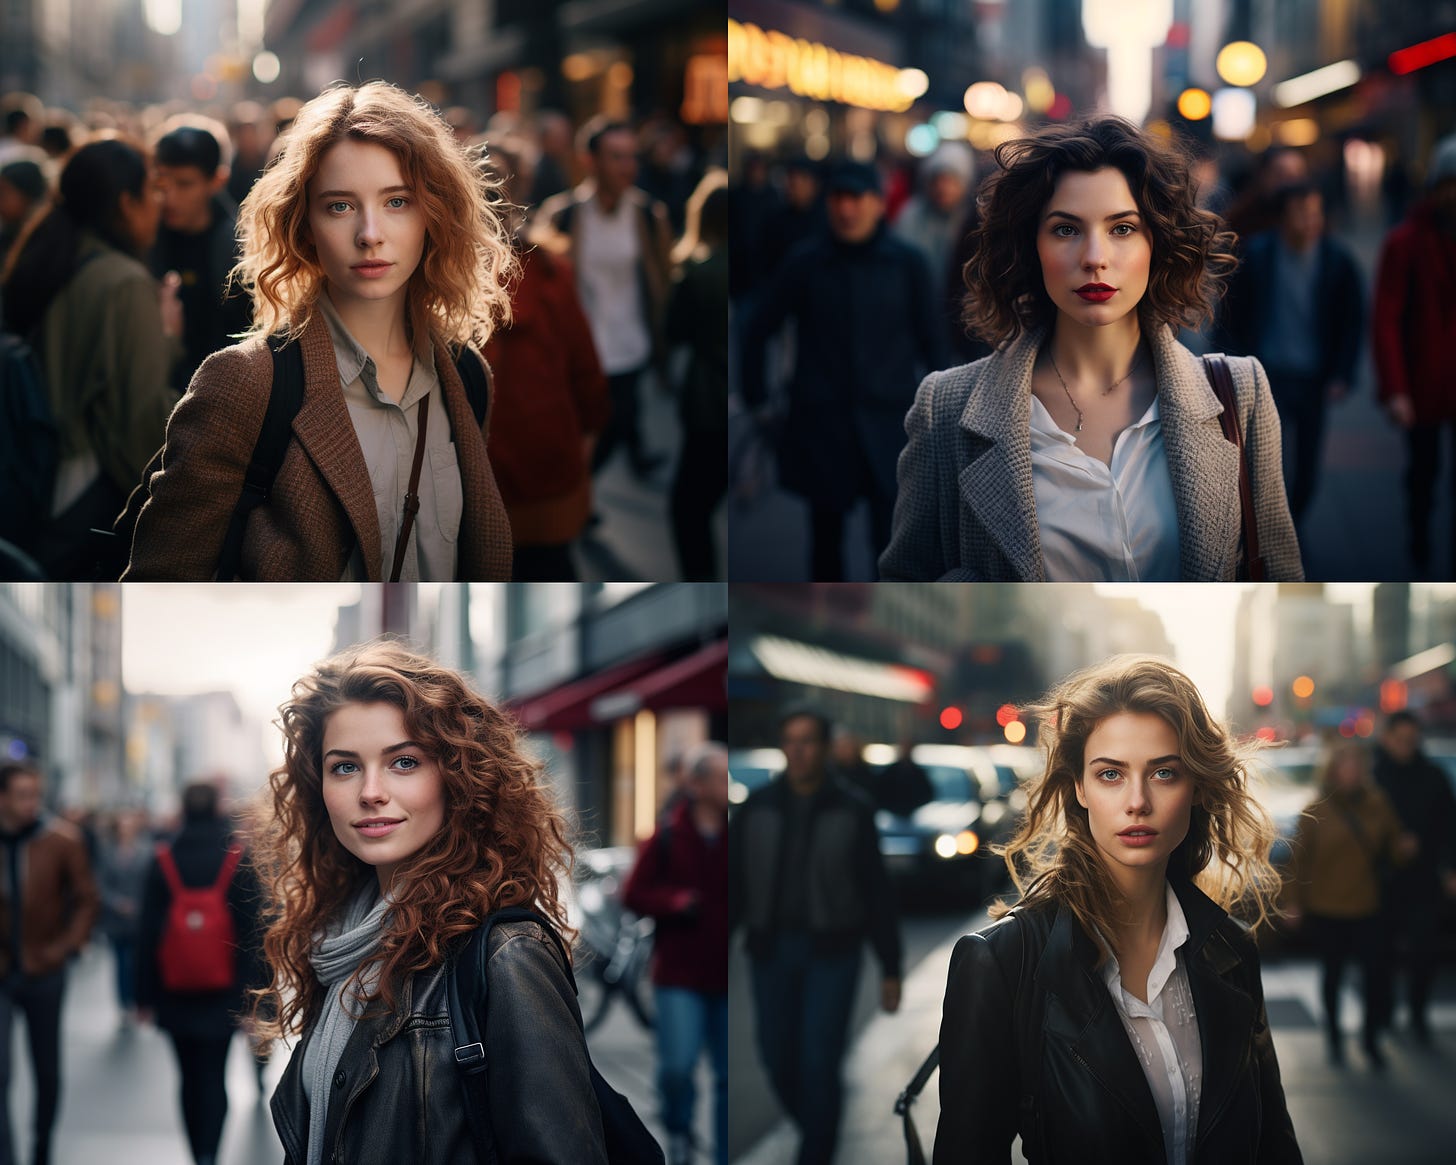 Four-grid output with four professional photos of women on a busy street. Midjourney V 5.2